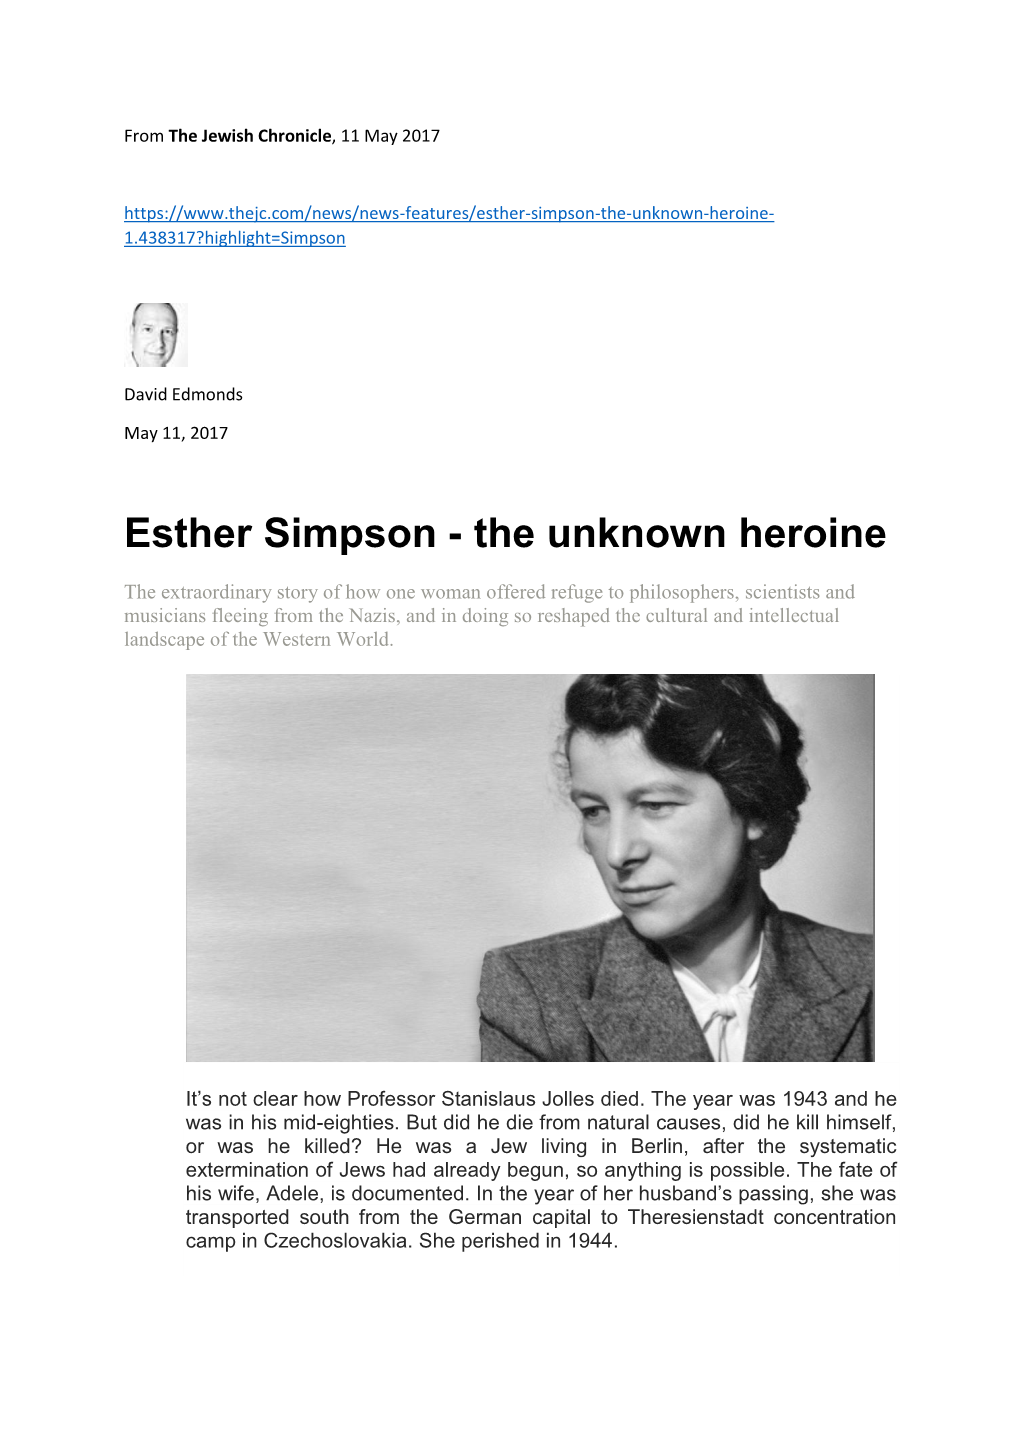 Esther Simpson - the Unknown Heroine